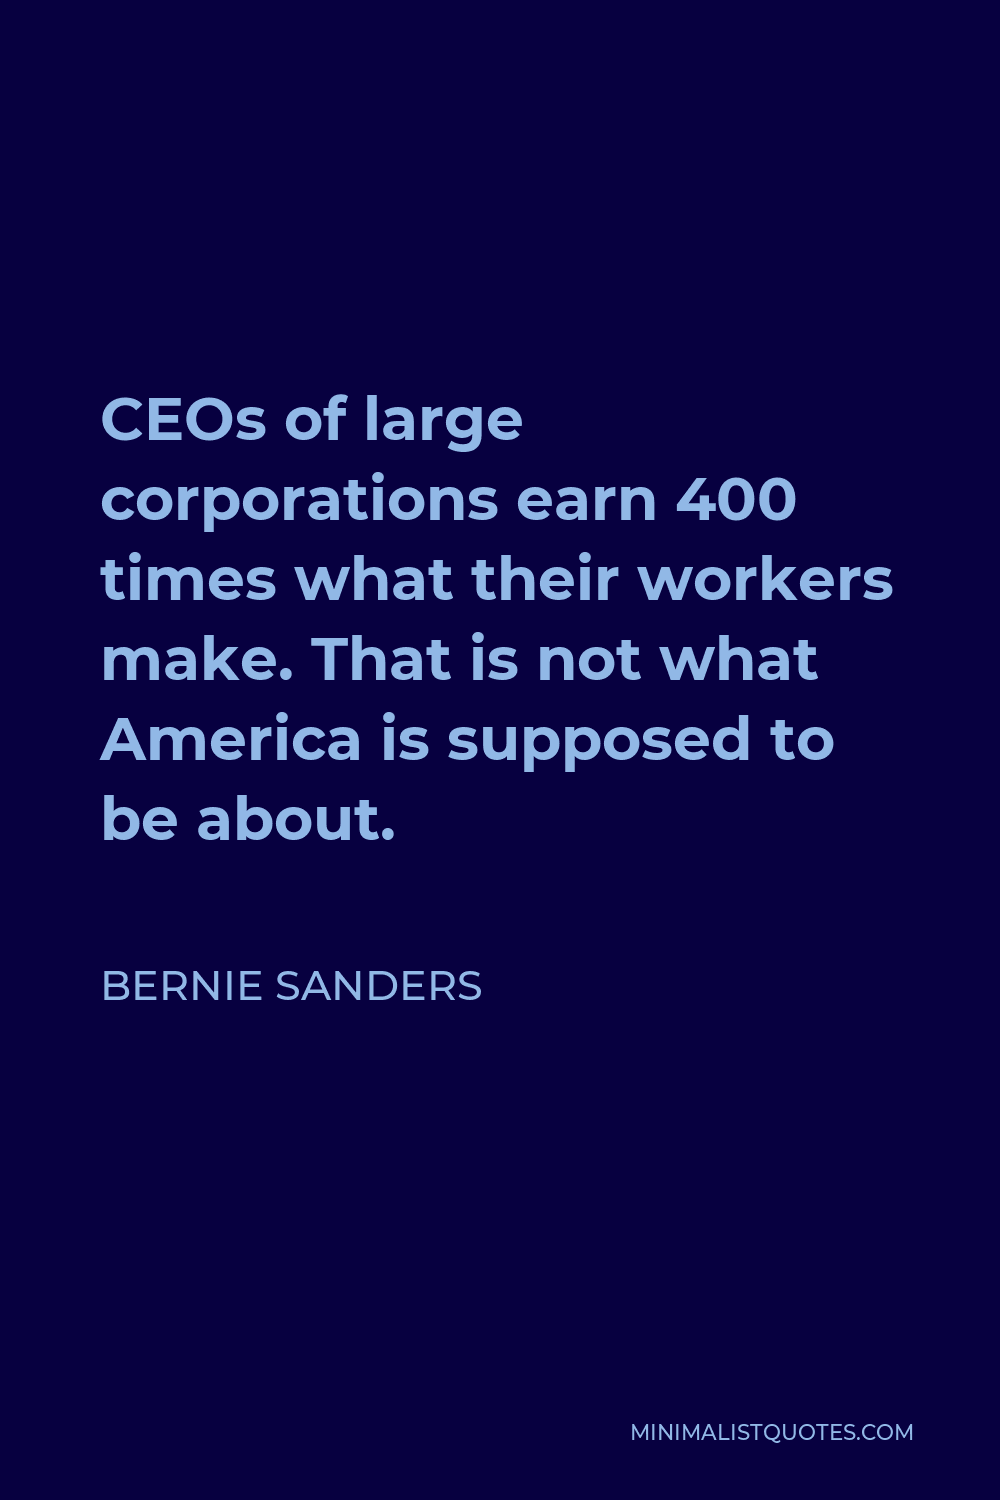 Bernie Sanders Quote - CEOs of large corporations earn 400 times what their workers make. That is not what America is supposed to be about.